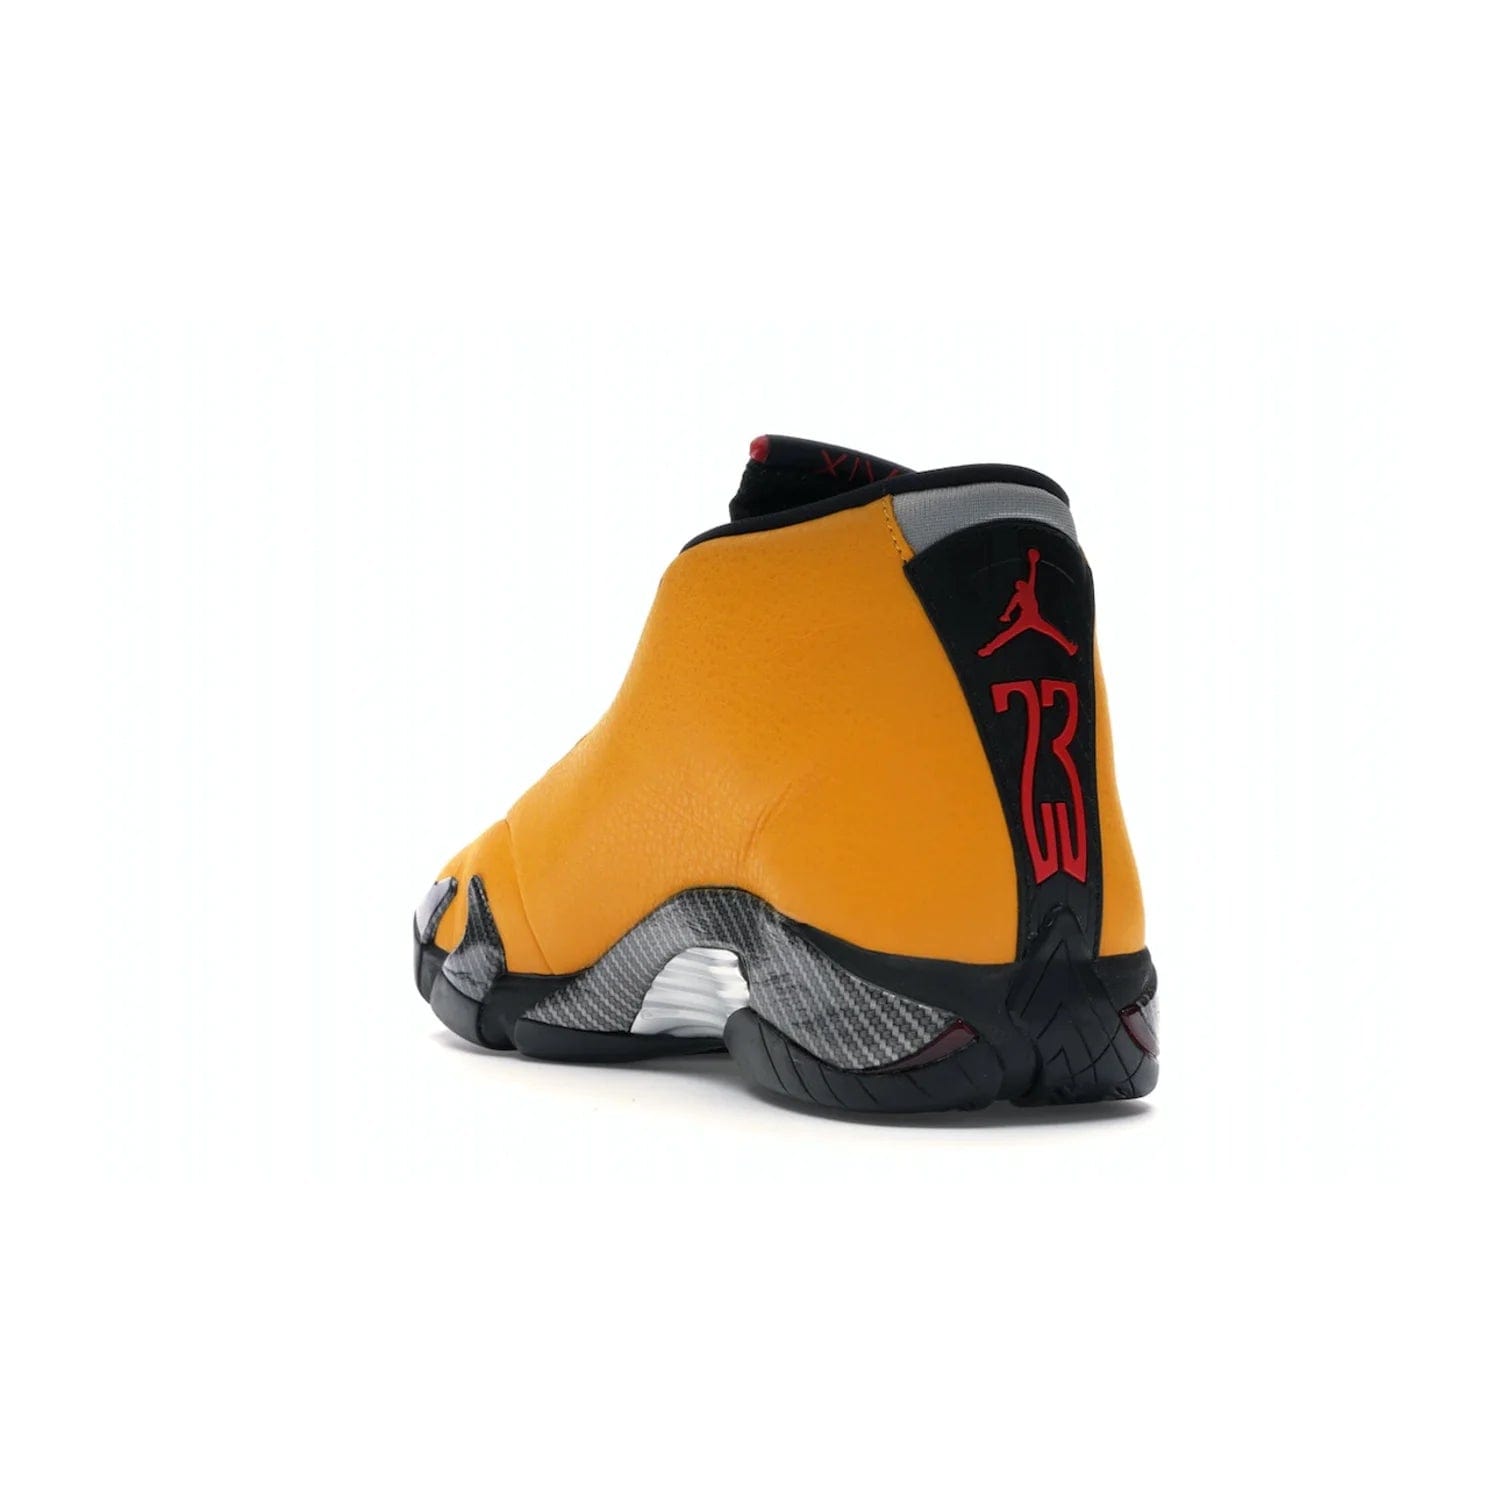 Jordan 14 Retro University Gold - Image 25 - Only at www.BallersClubKickz.com - Air Jordan 14 Retro University Gold: High-quality leather sneaker with Jumpman, tongue & heel logos. Zoom Air units & herringbone traction for superior comfort. University Gold outsole for stylish streetwear.